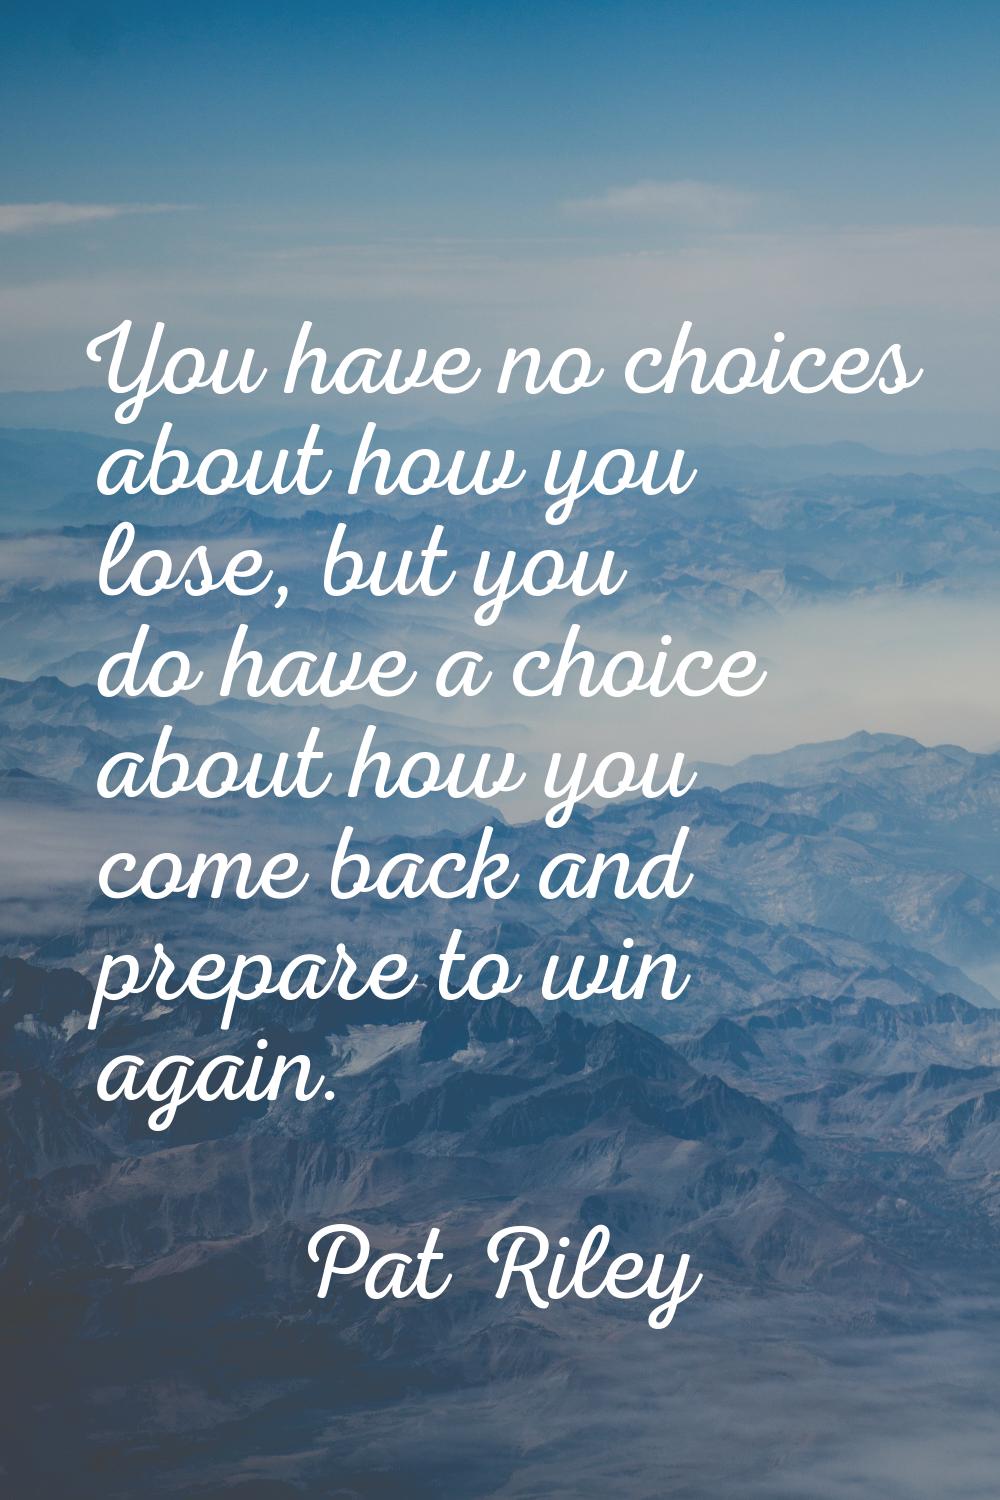 You have no choices about how you lose, but you do have a choice about how you come back and prepar